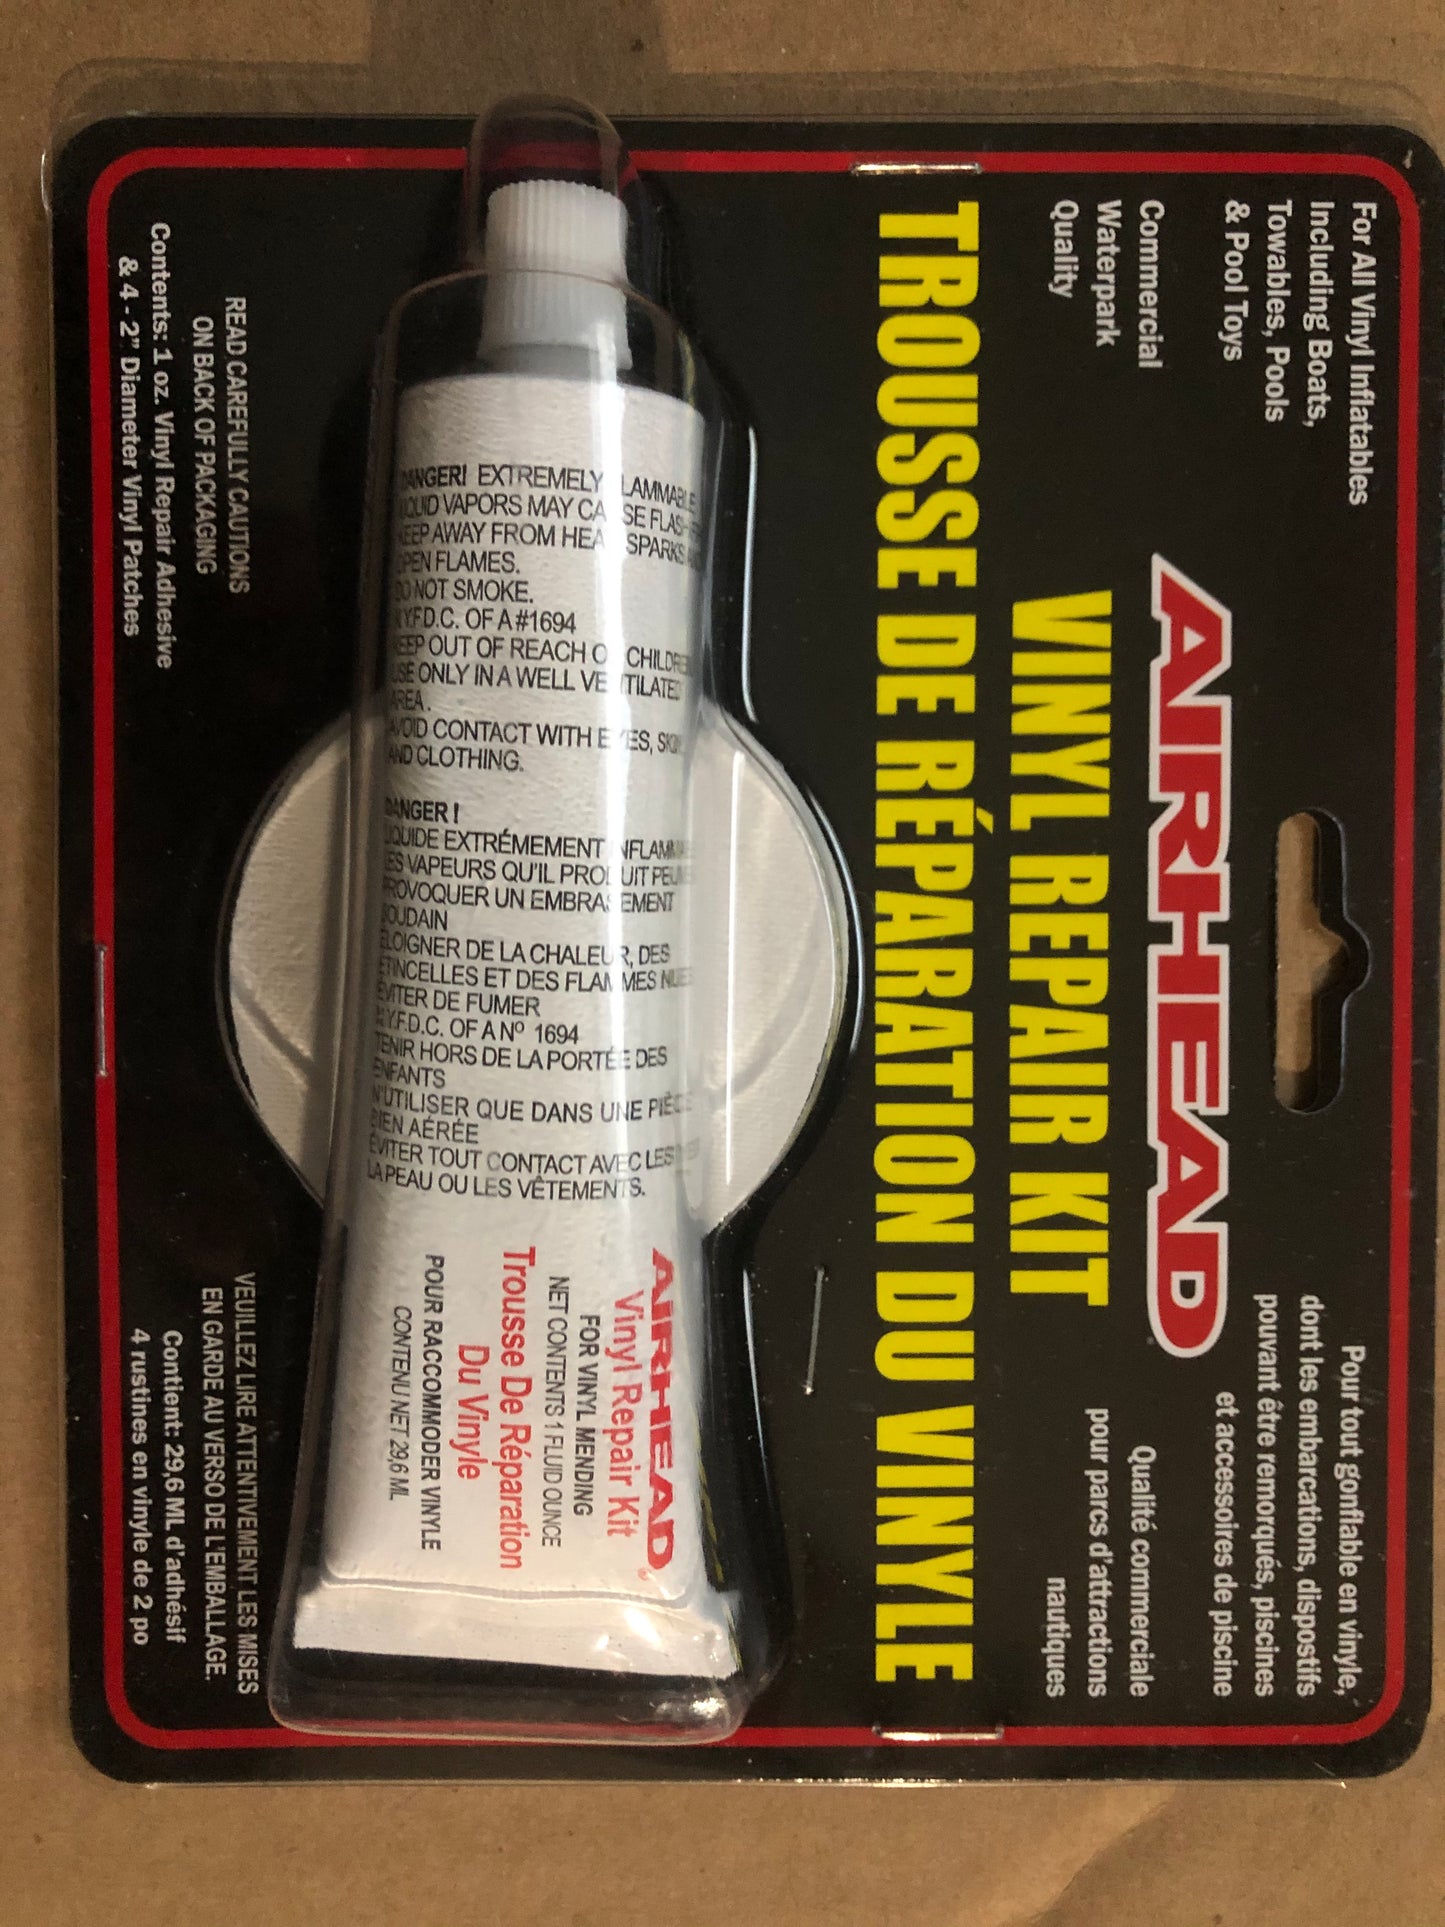 Airhead Vinyl Repair Kit For Inflatable – Something, Anything, and A Little  Bit Of Everything